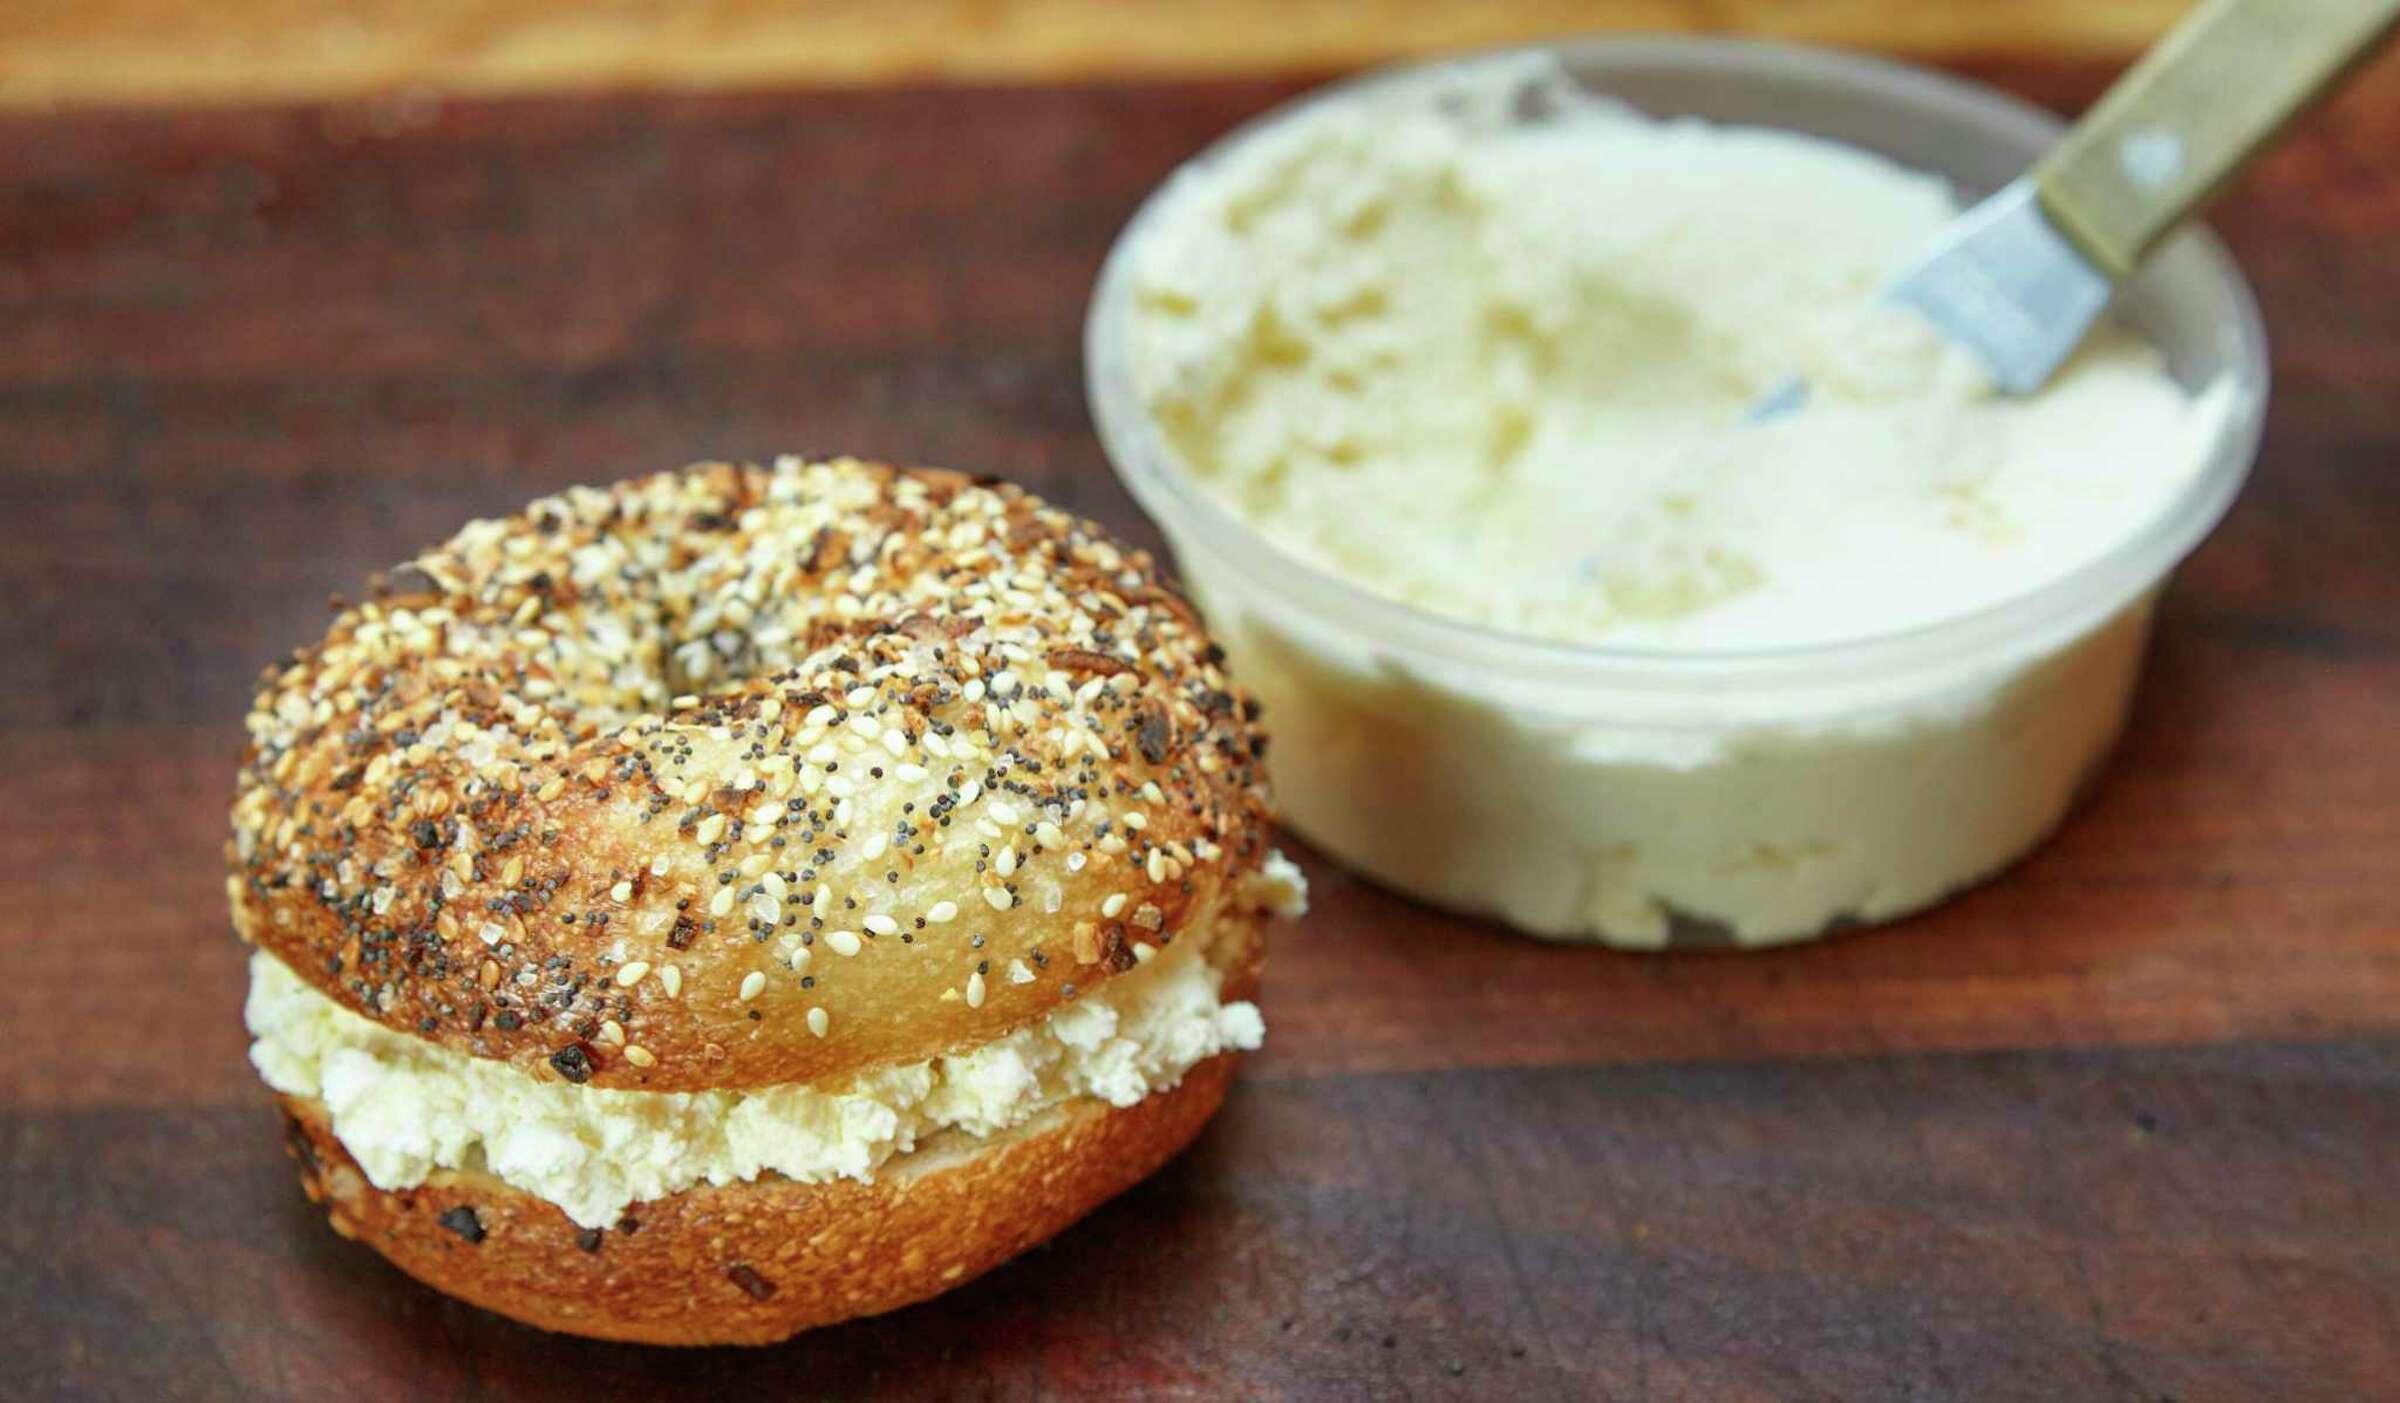 Popular S.F. bagel shop Daily Driver is opening in Ghirardelli Square